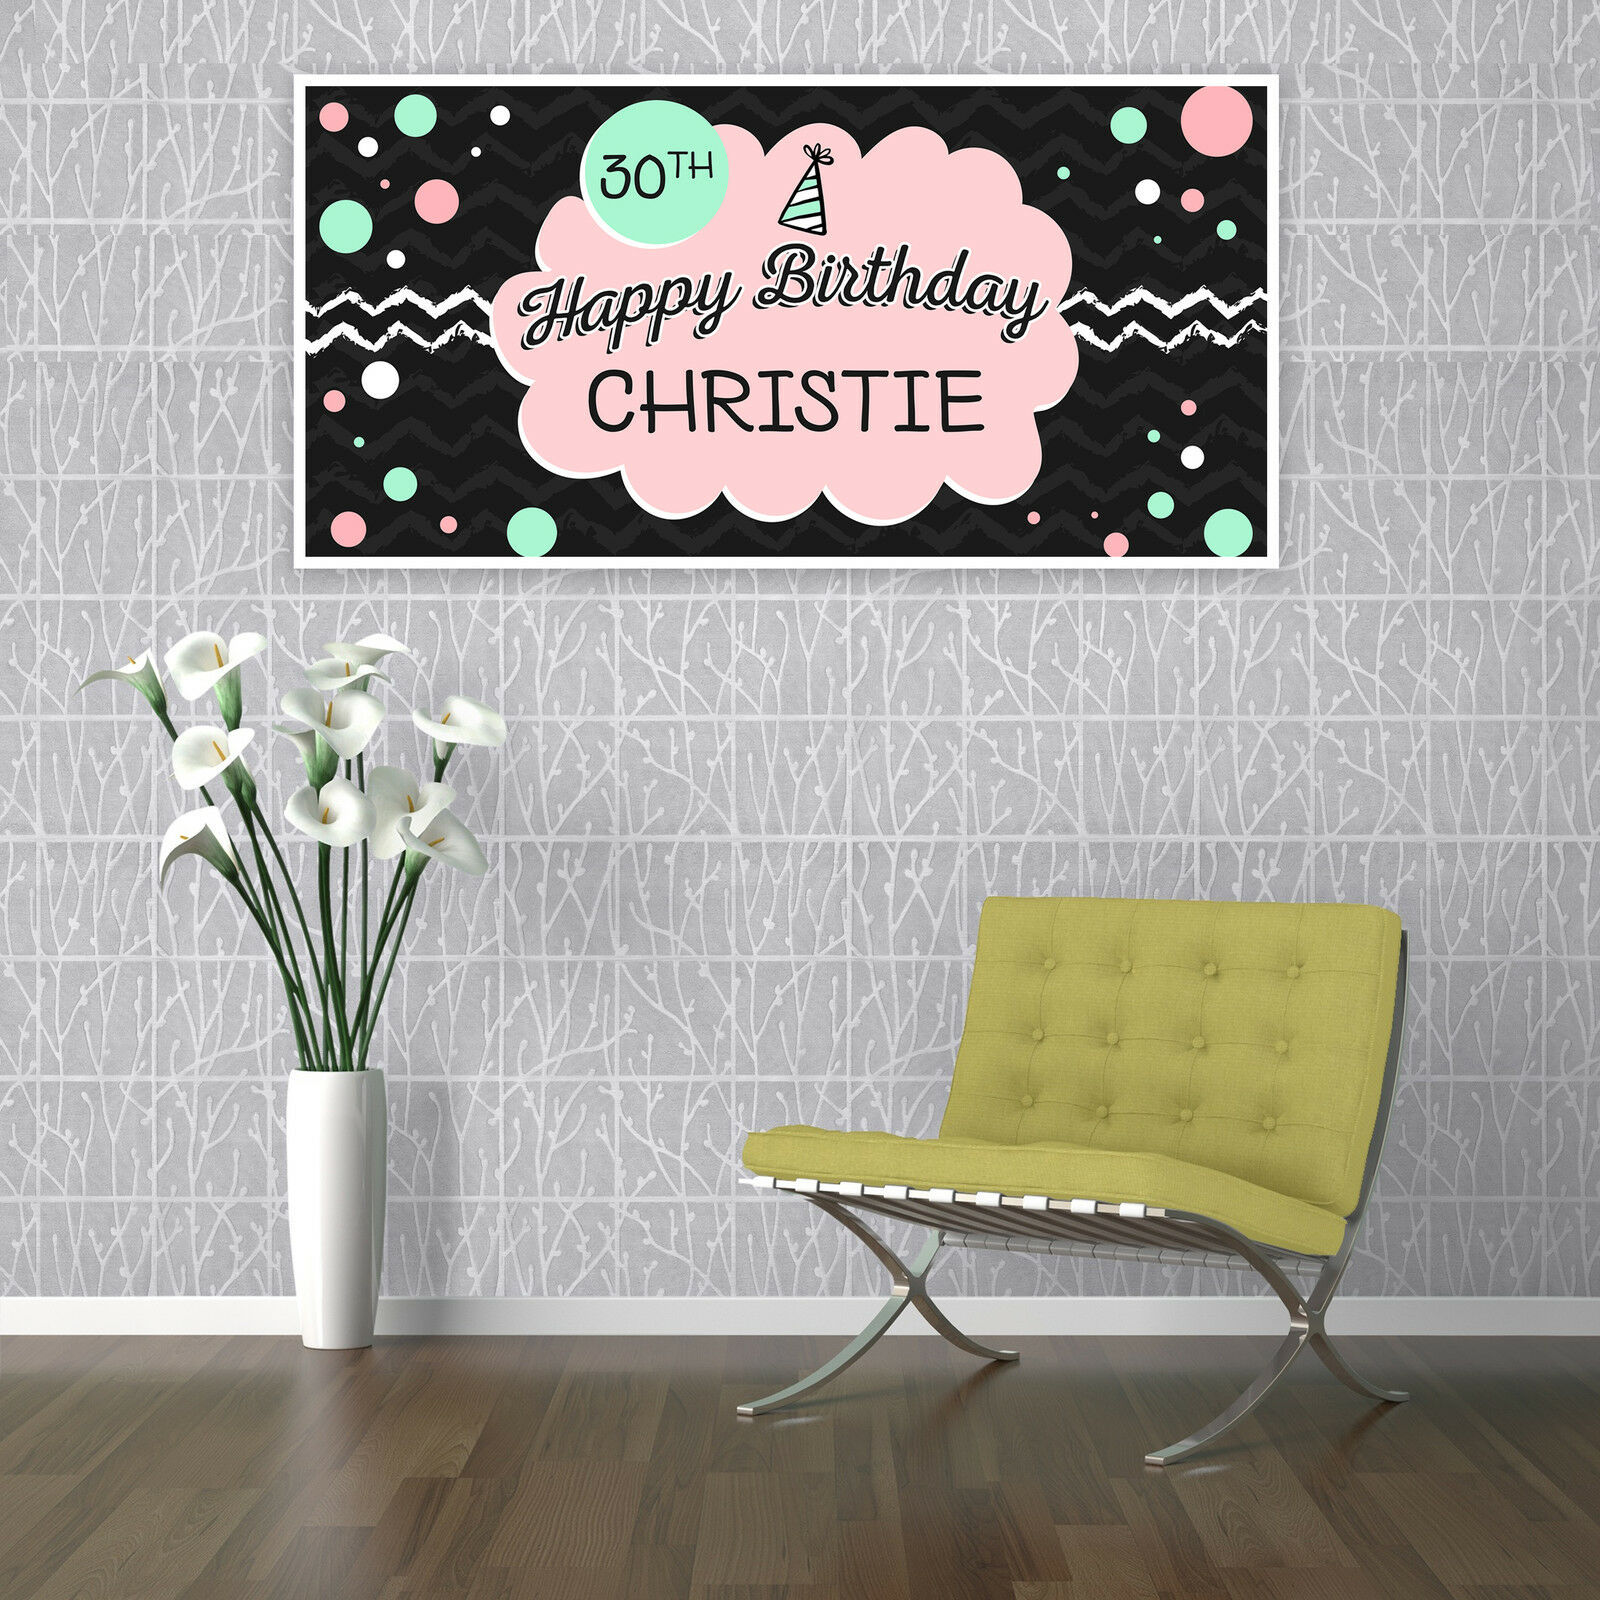 30th-birthday-banner-colors-balls-party-backdrop-decoration-any-age